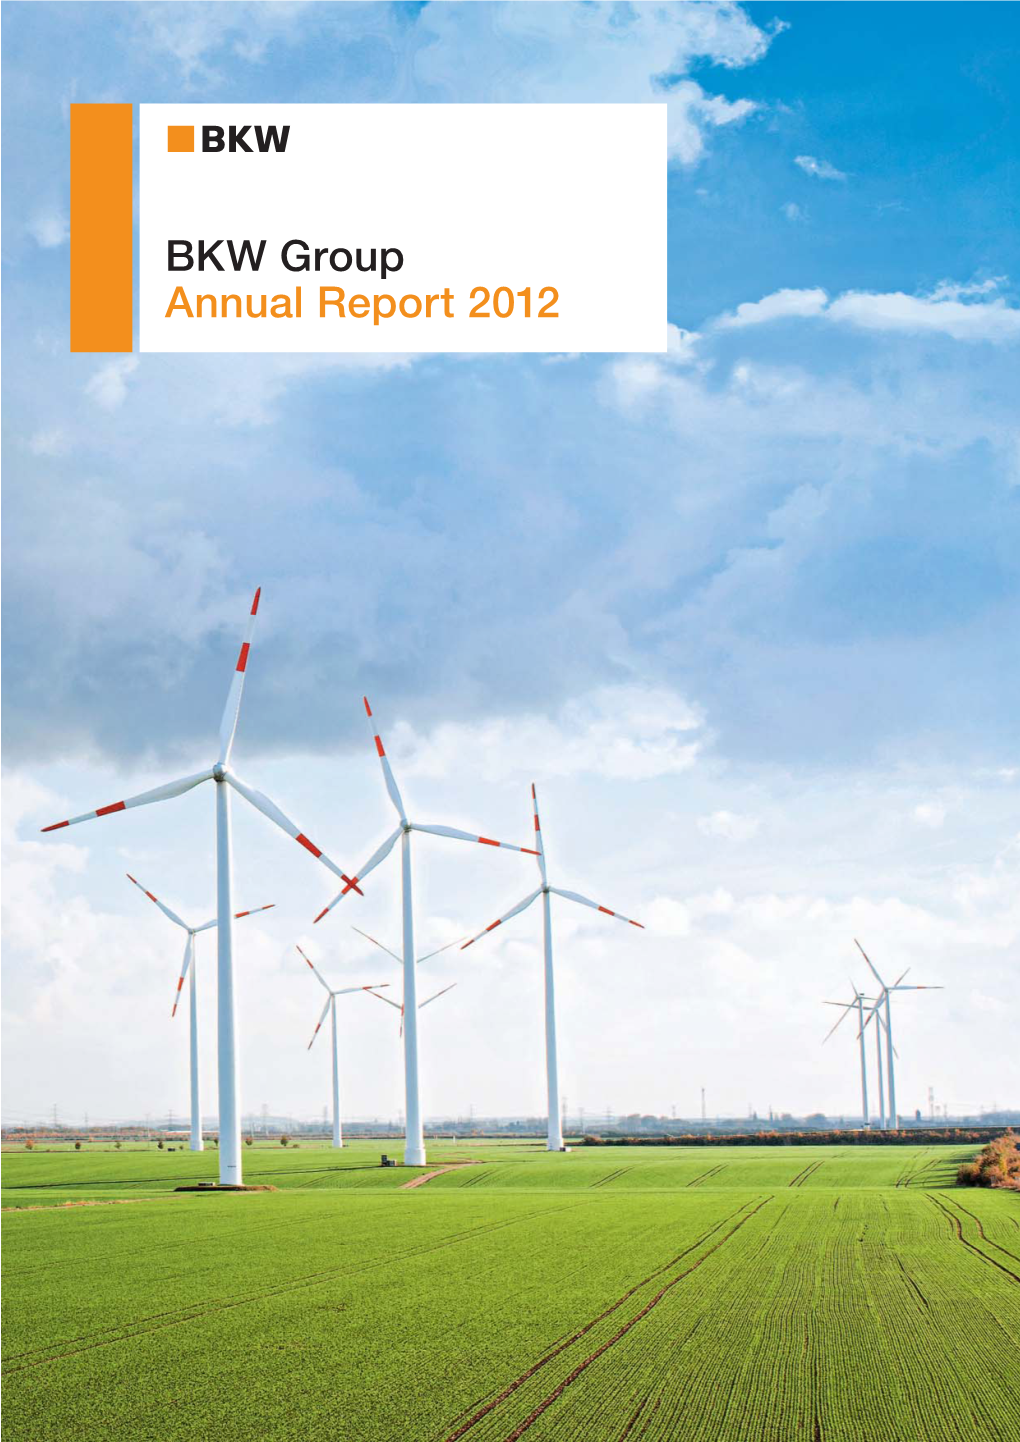 BKW Group Annual Report 2012 the BKW Group Is One of Switzerland’S Largest Energy Companies